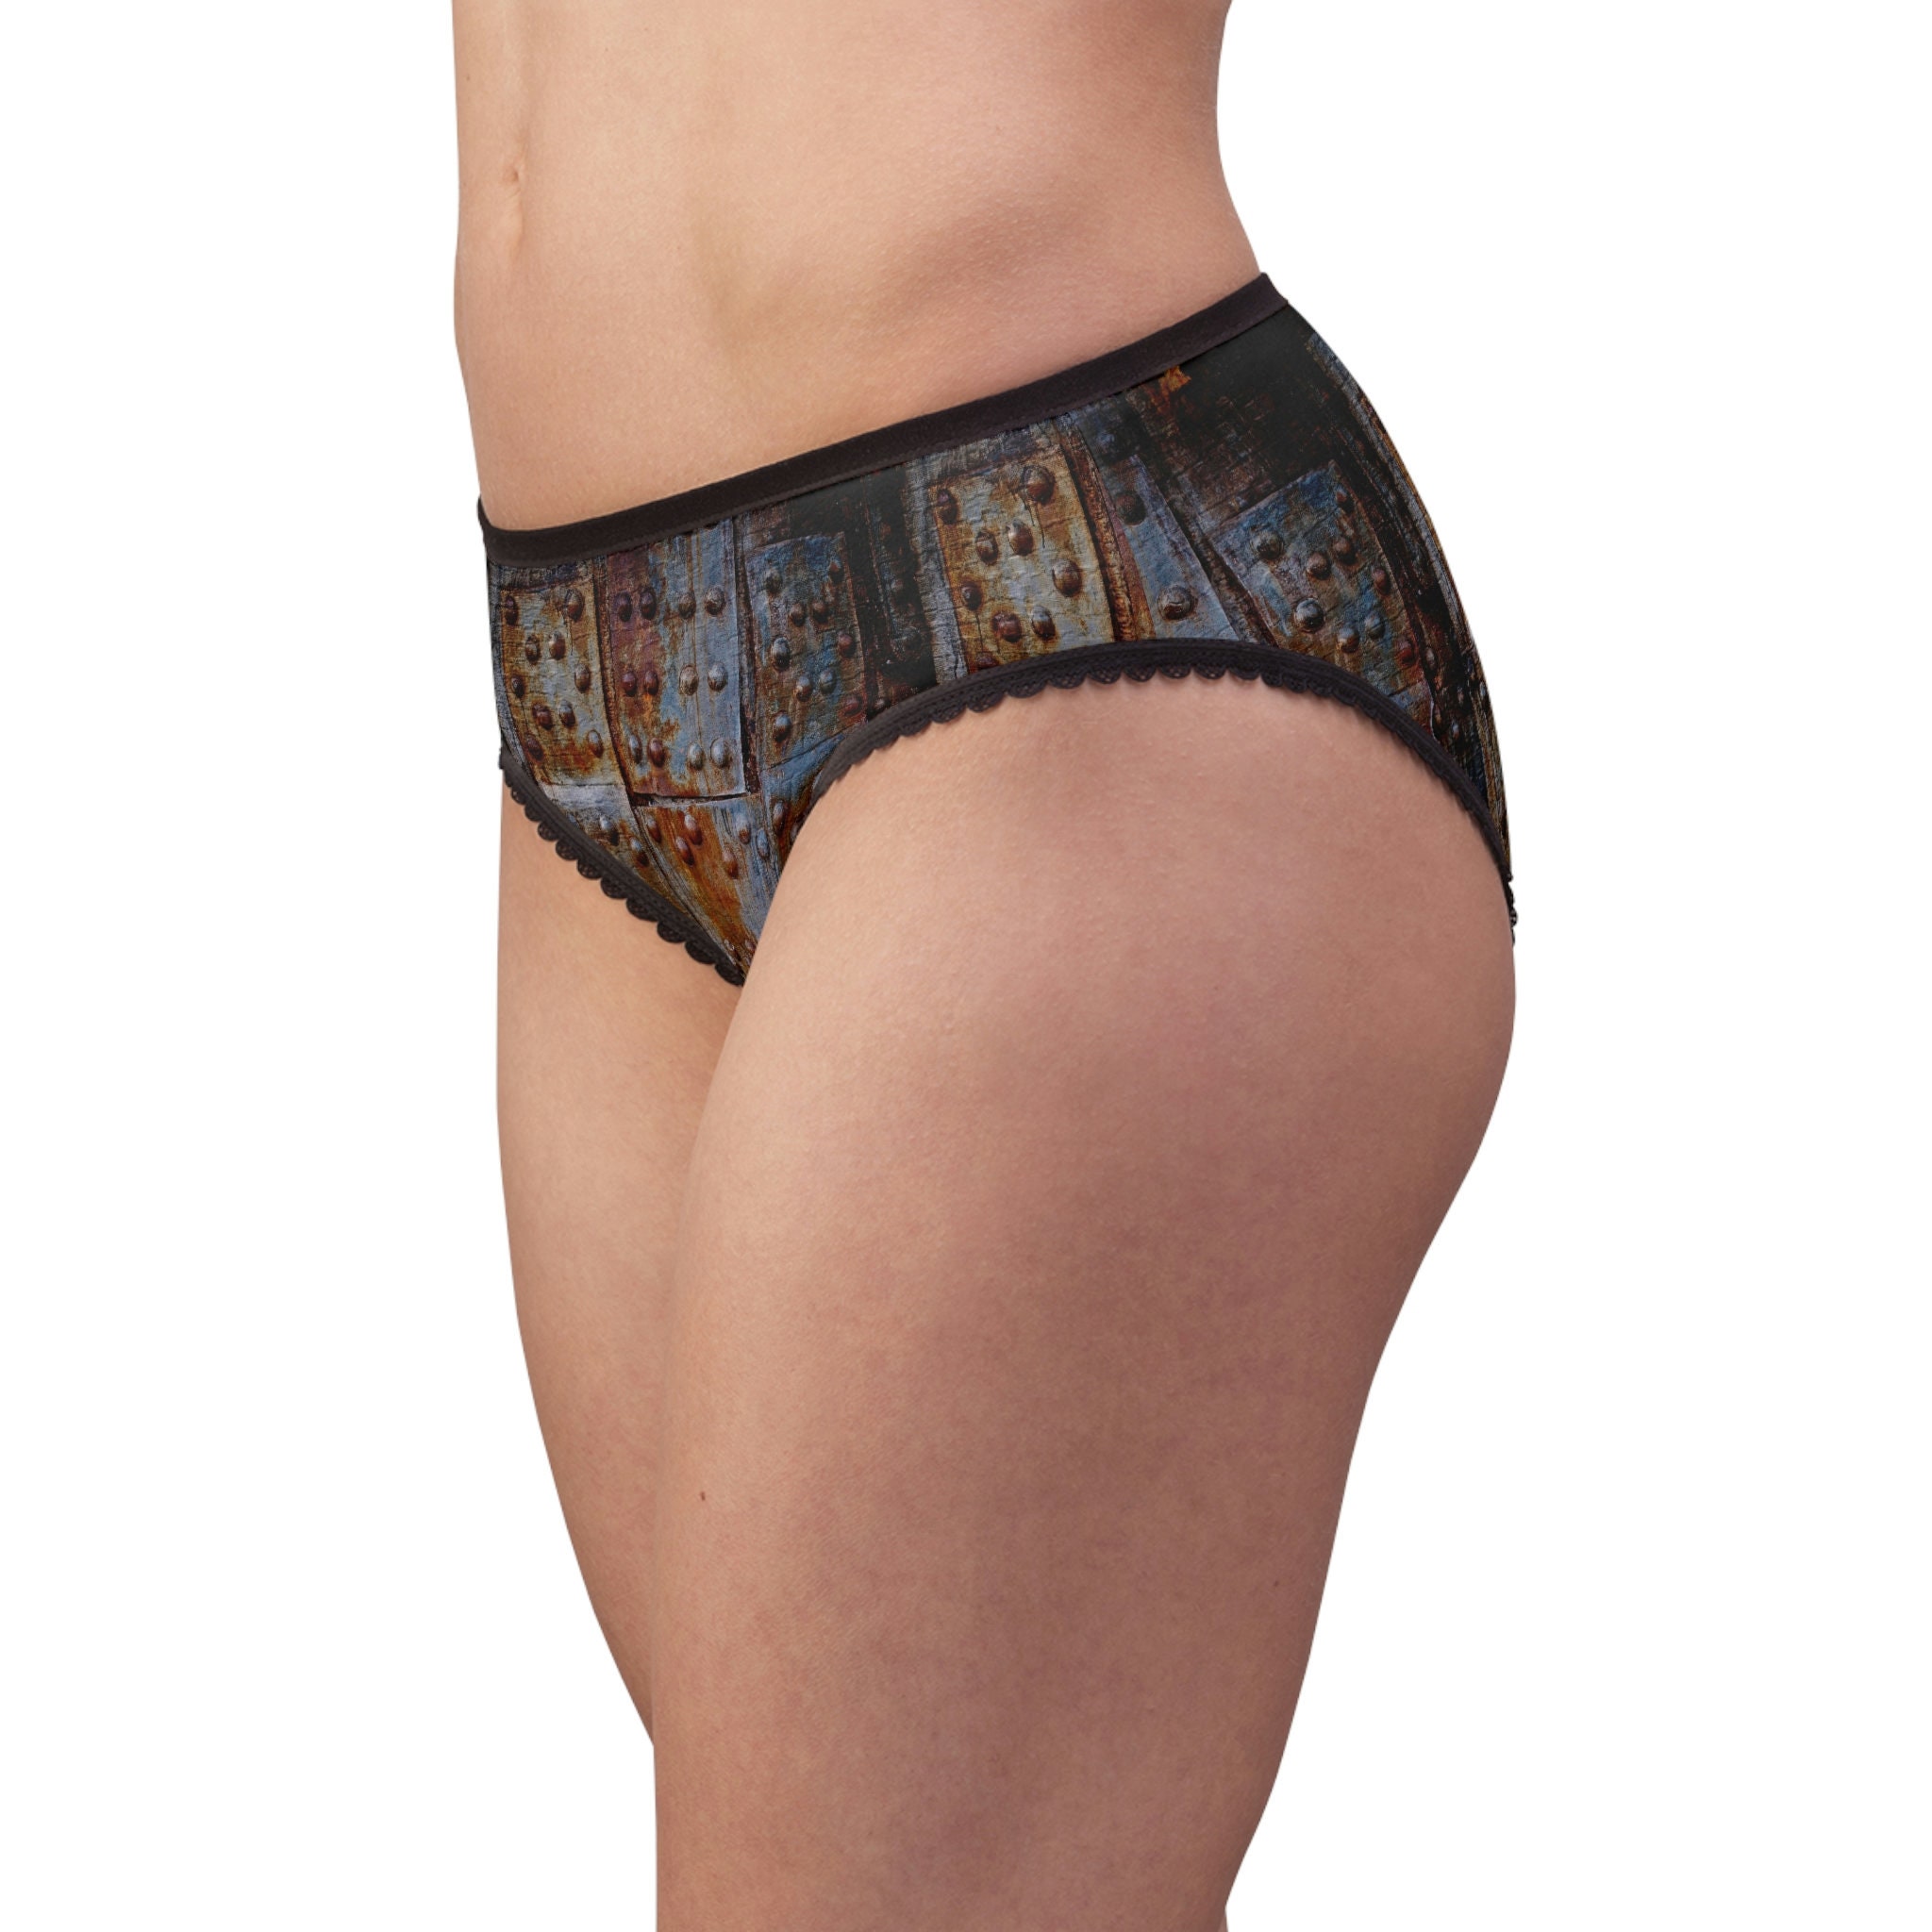 Thong Undies in Rust by Lotus Tribe Clothing. Women's G String